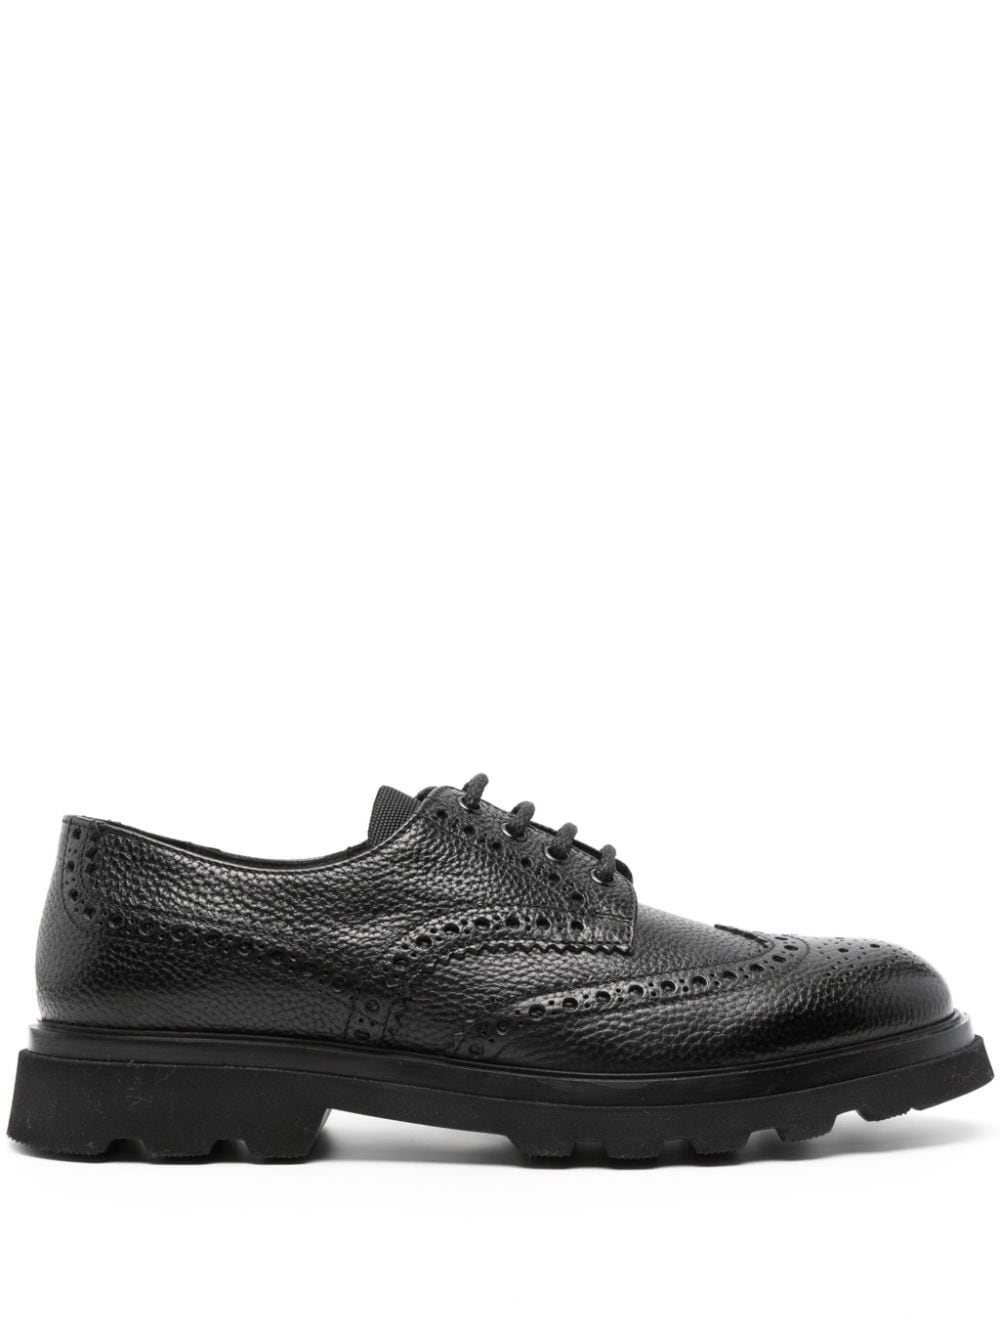 Doucal's panelled leather brogues - Black von Doucal's